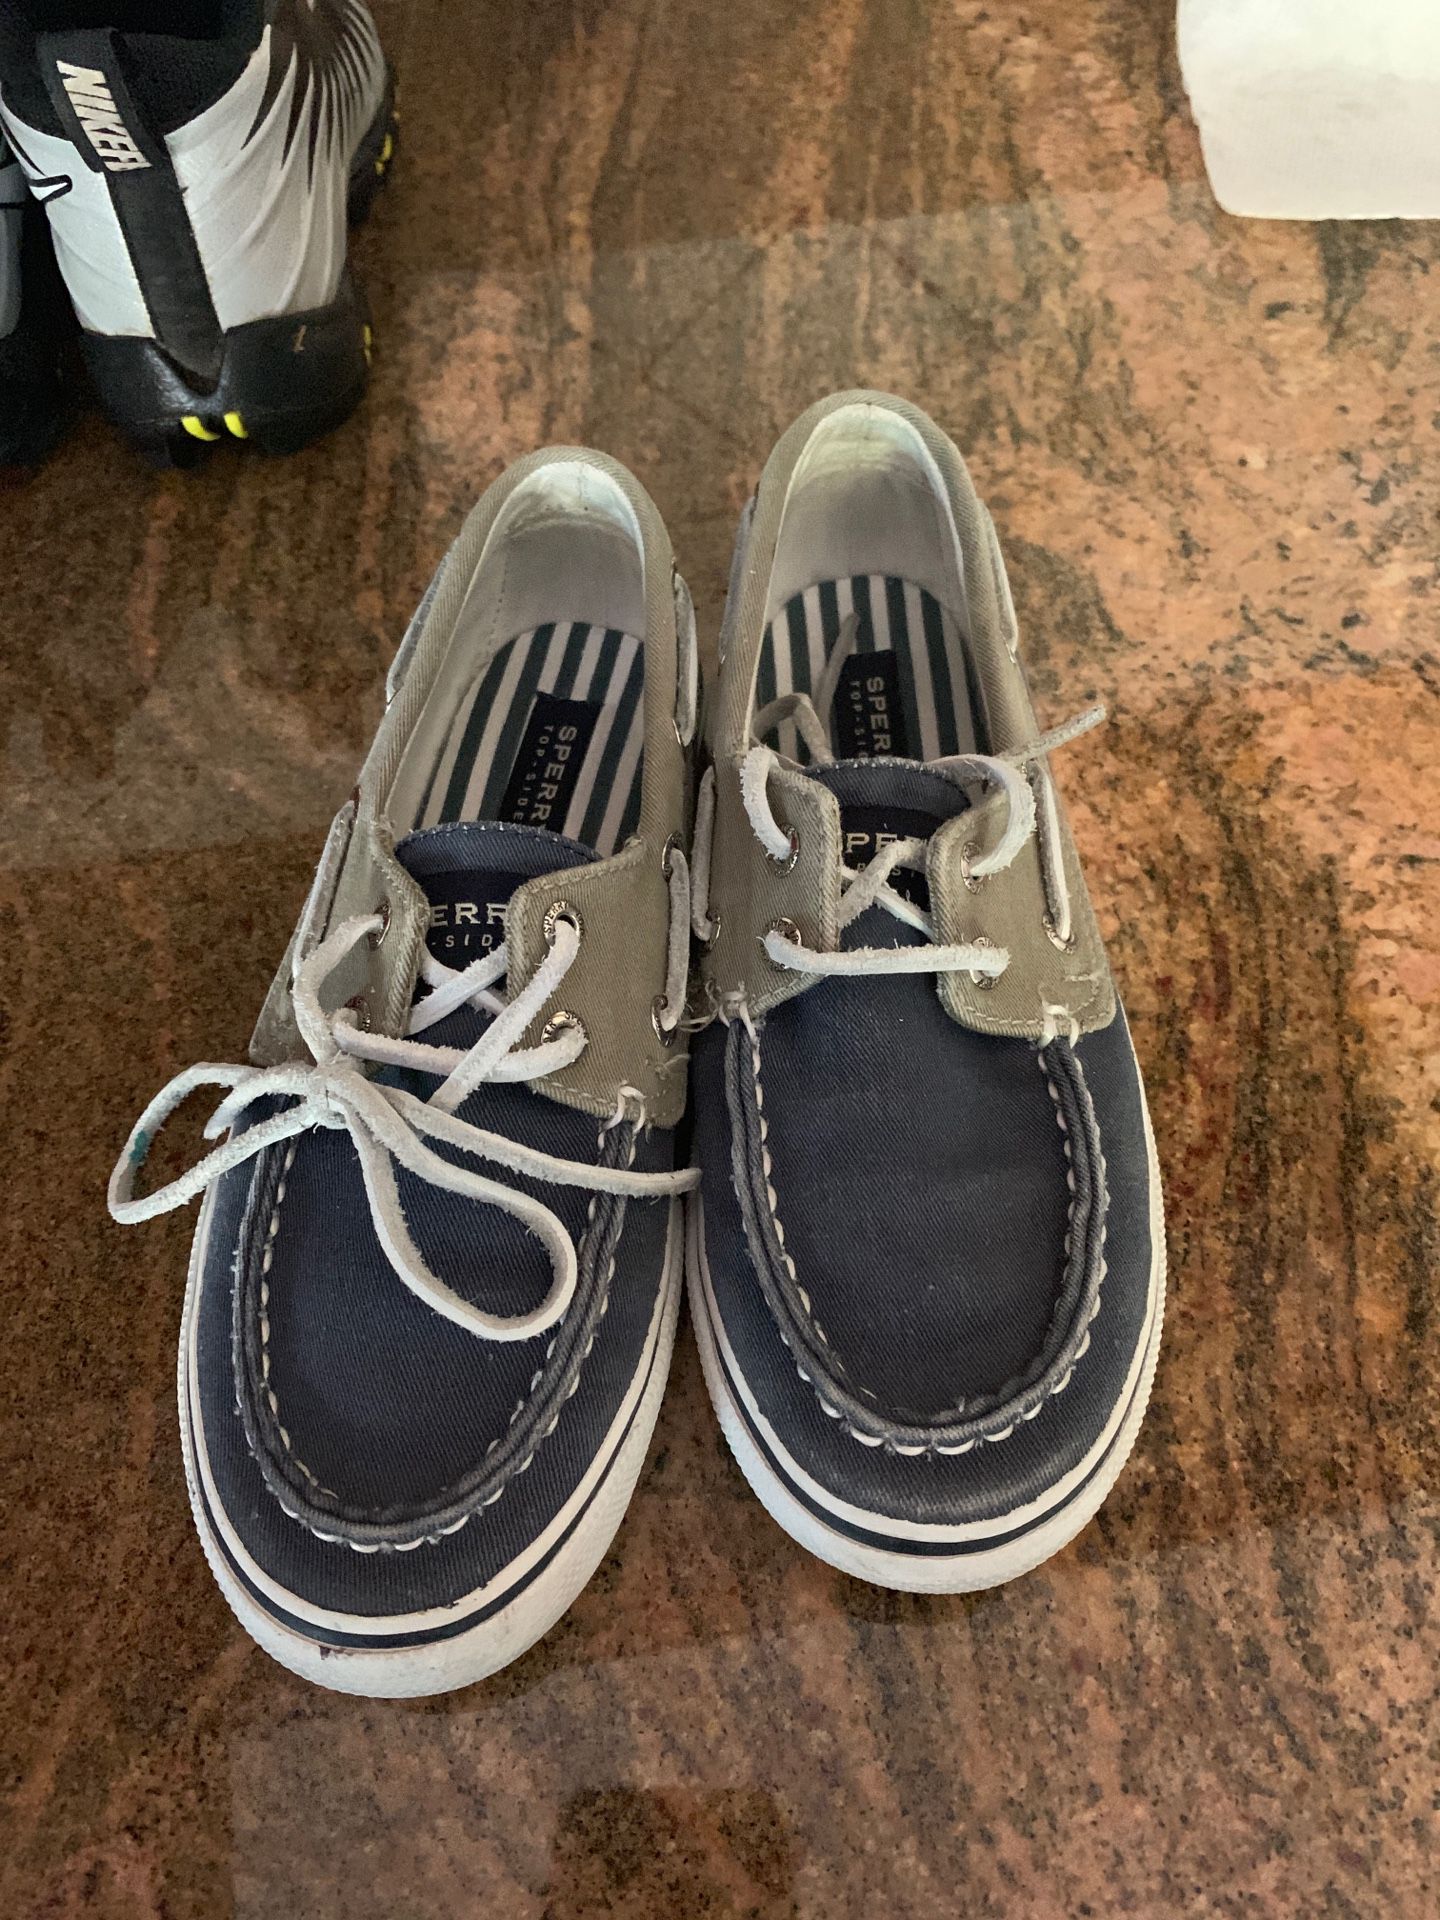 Sperry for little boys size 1.5